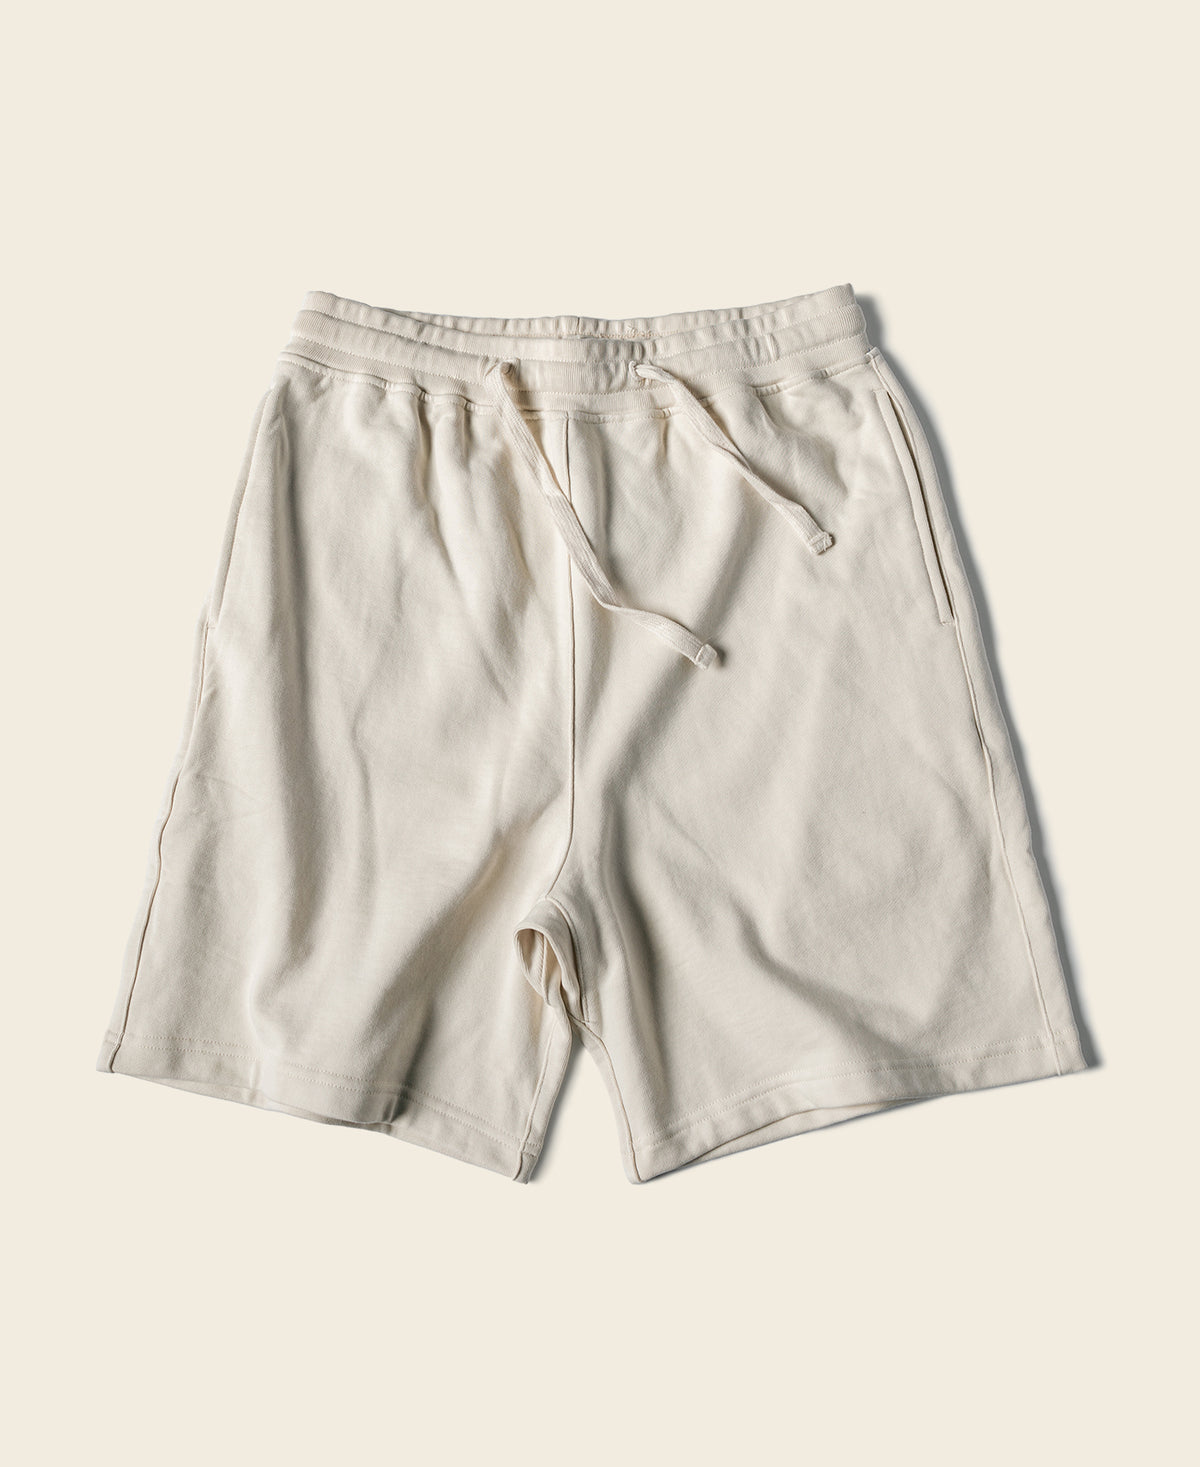 15 oz French Terry Sweat Shorts - Apricot